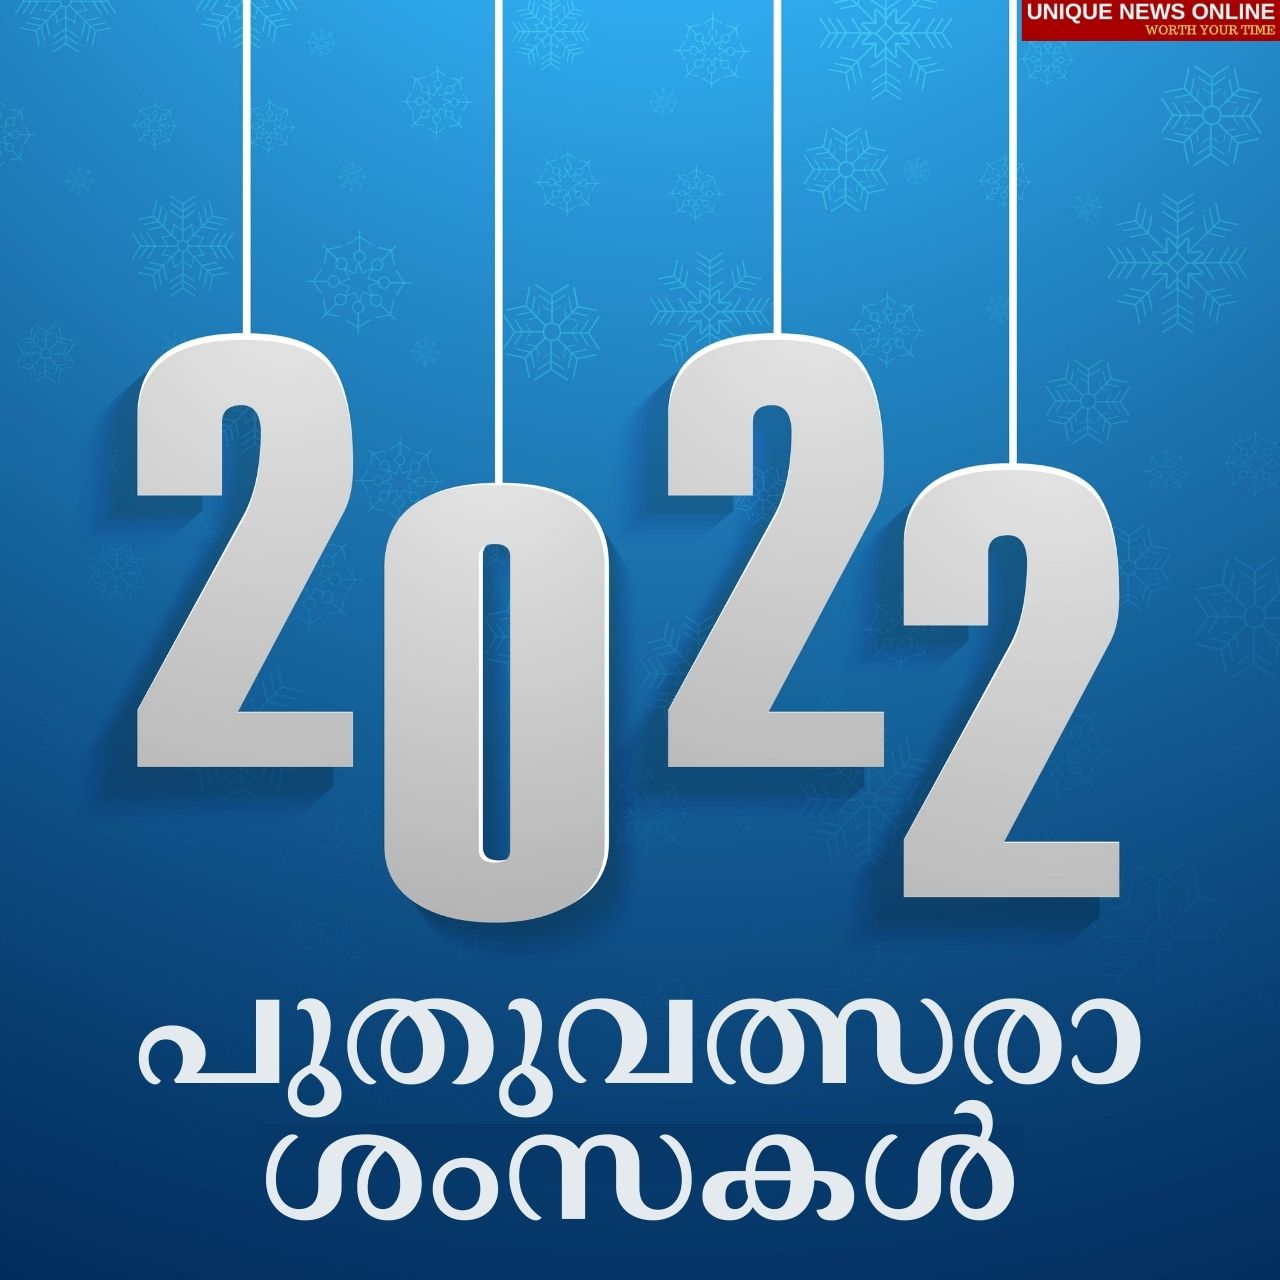 New Year 2022: Malayalam Quotes, Messages, Greetings, HD Images, Posters, Sayings, Cliparts to Share